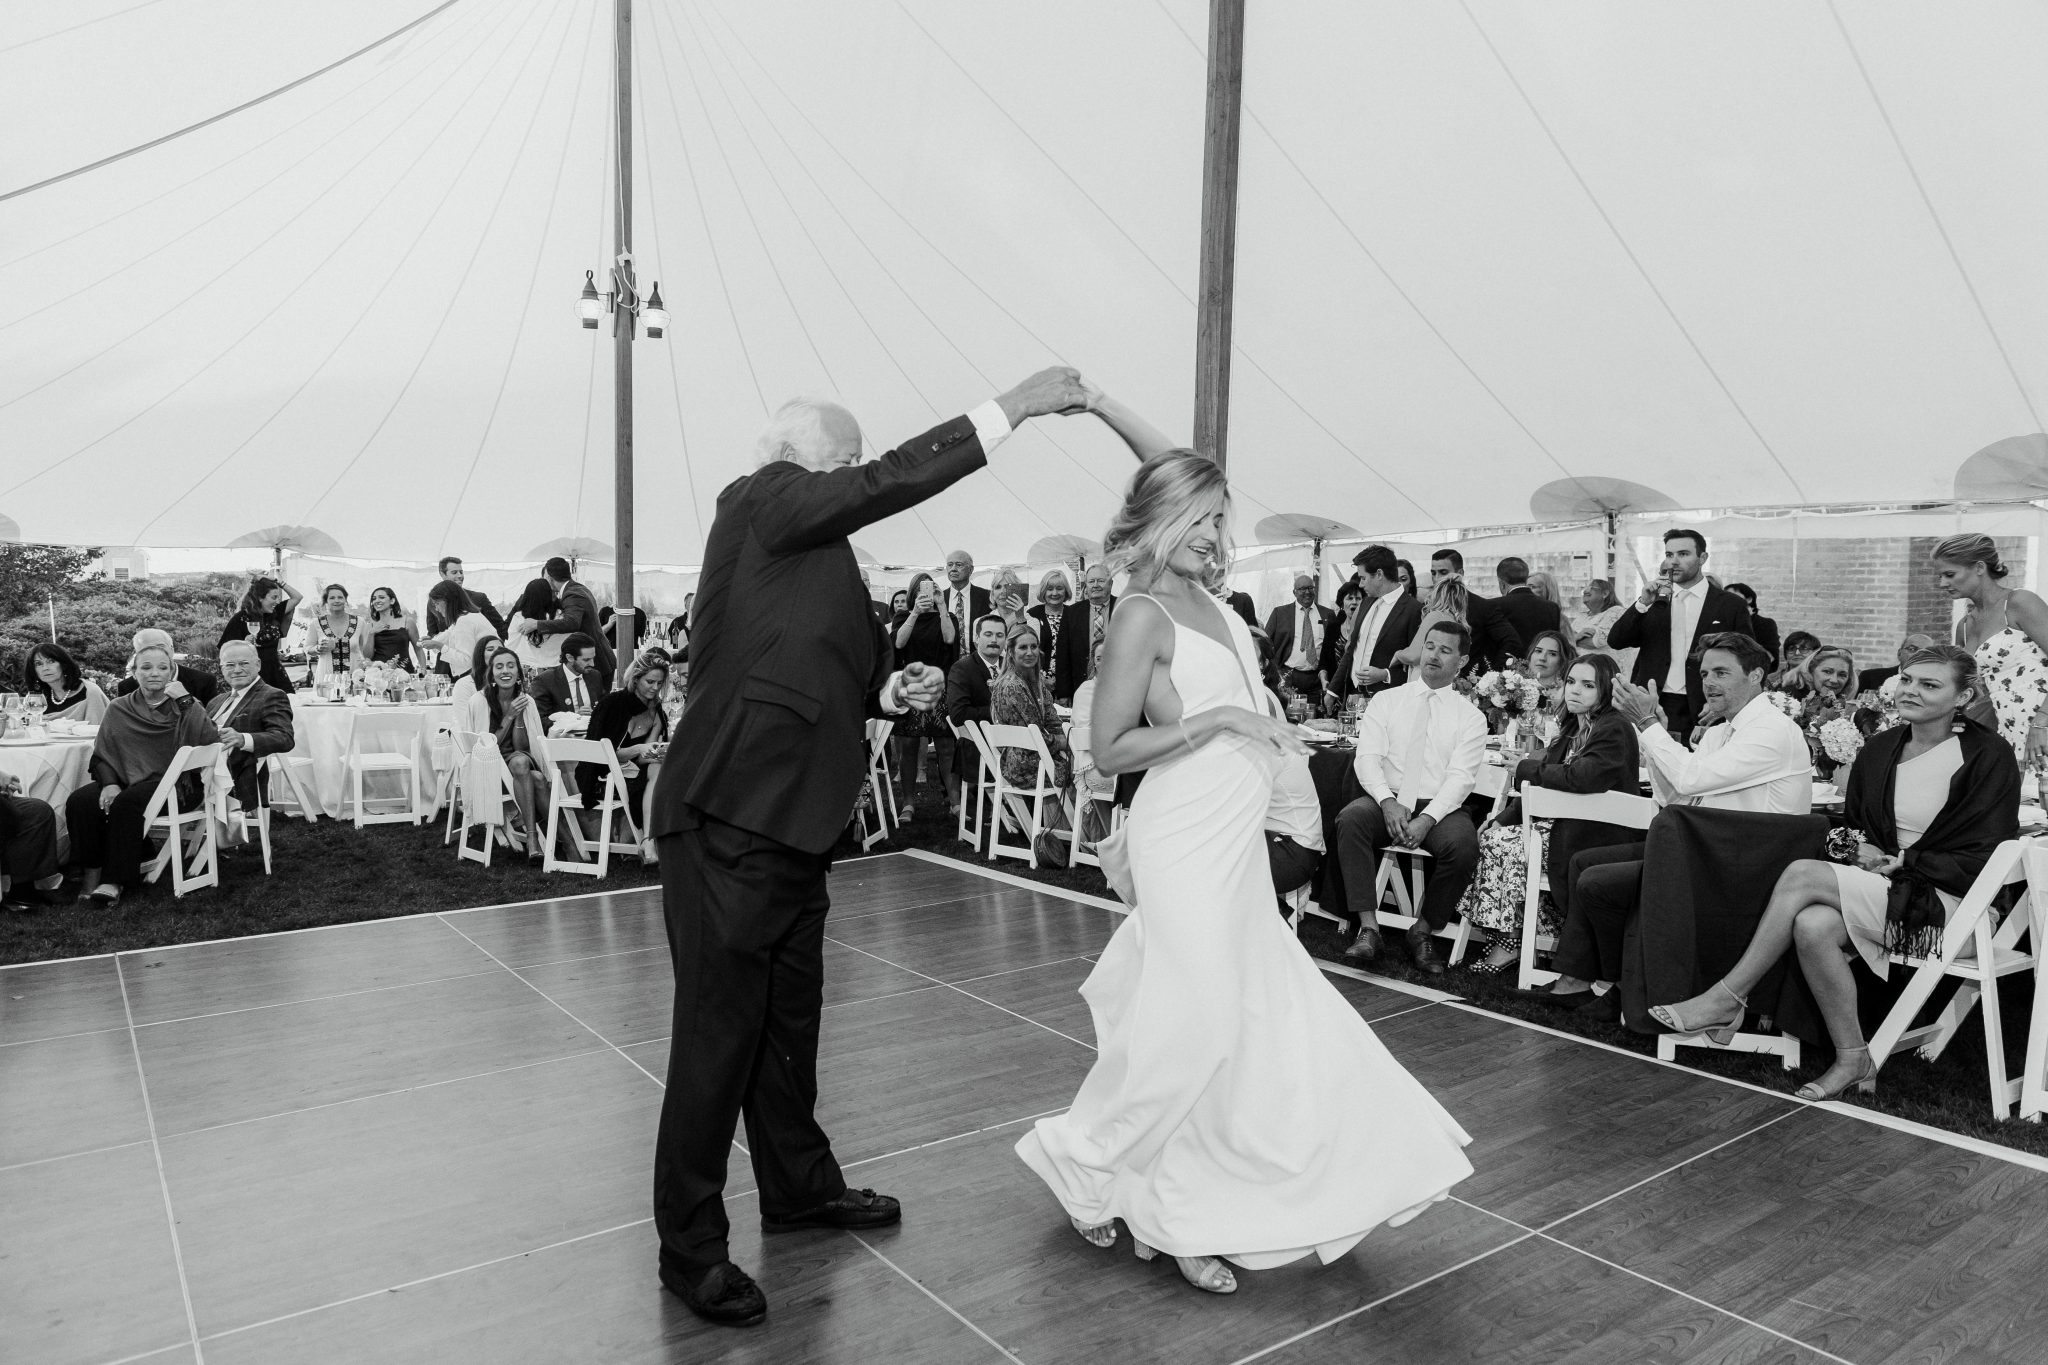 Wedding Photography Tips: How to Take Gorgeous Indoor Wedding Photos by popular New England photographer, Shannon Shipman: image of a bride dancing with her father. 